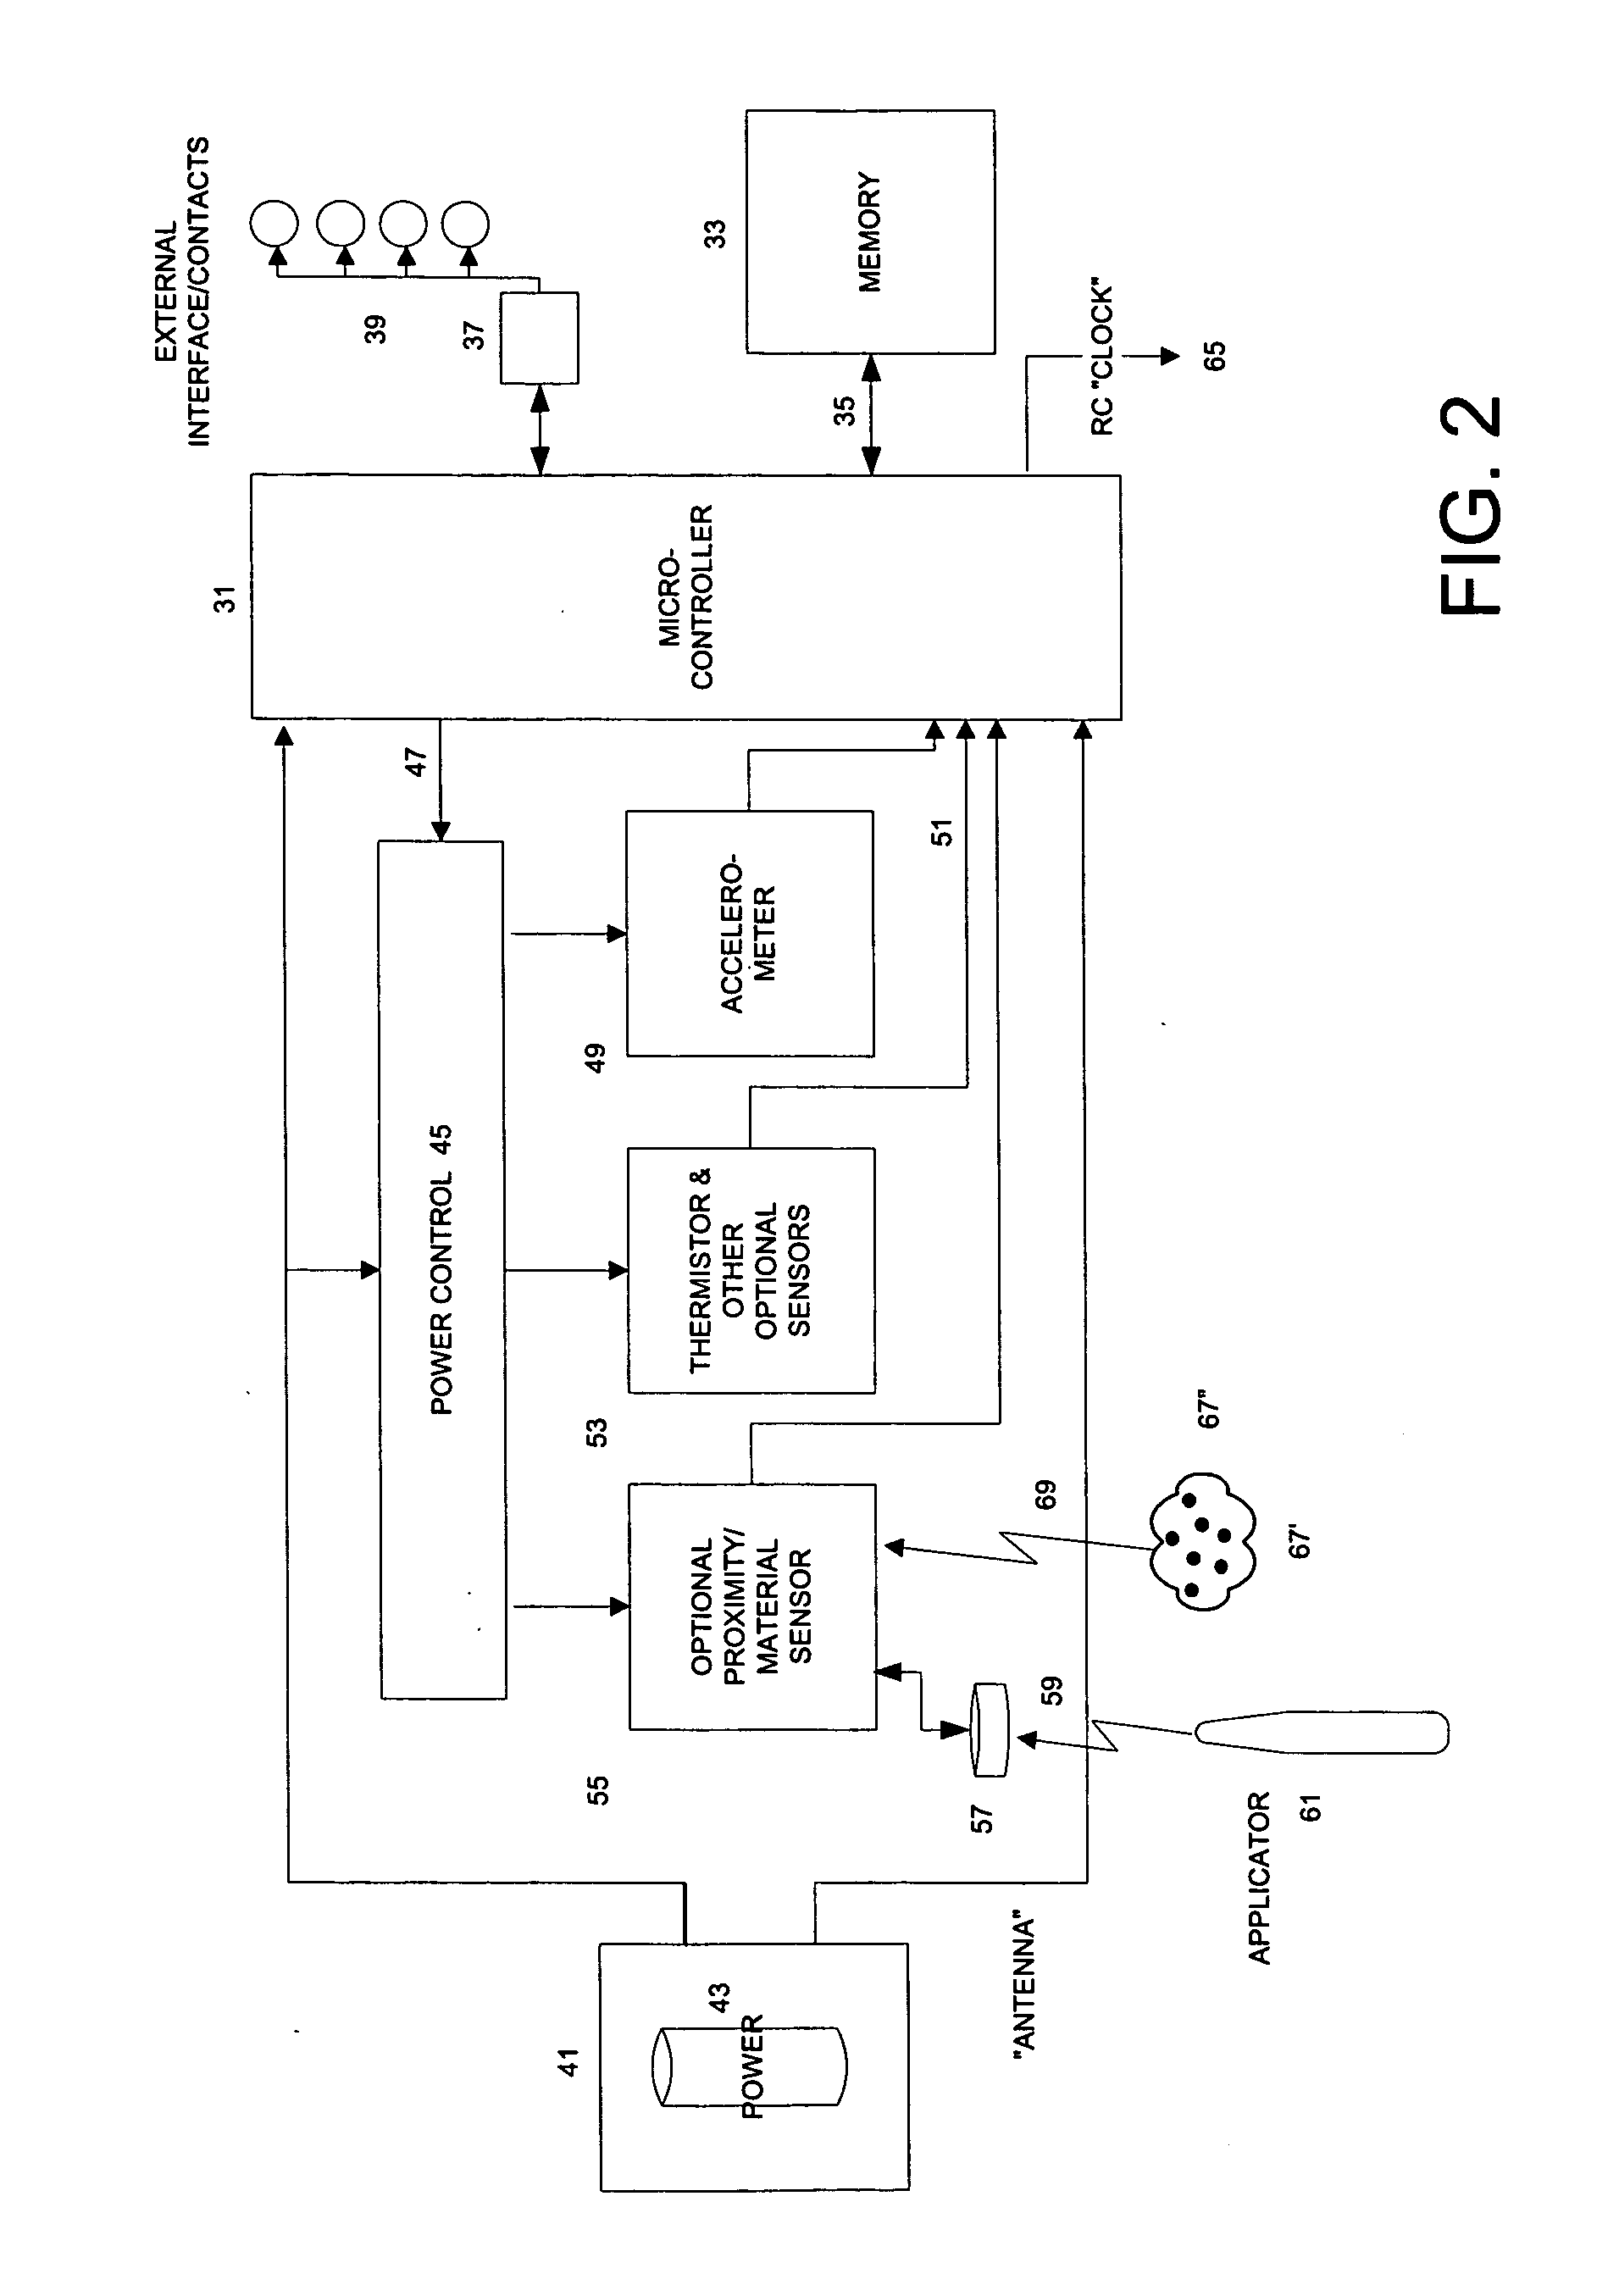 Apparatus and methods for monitoring subjects